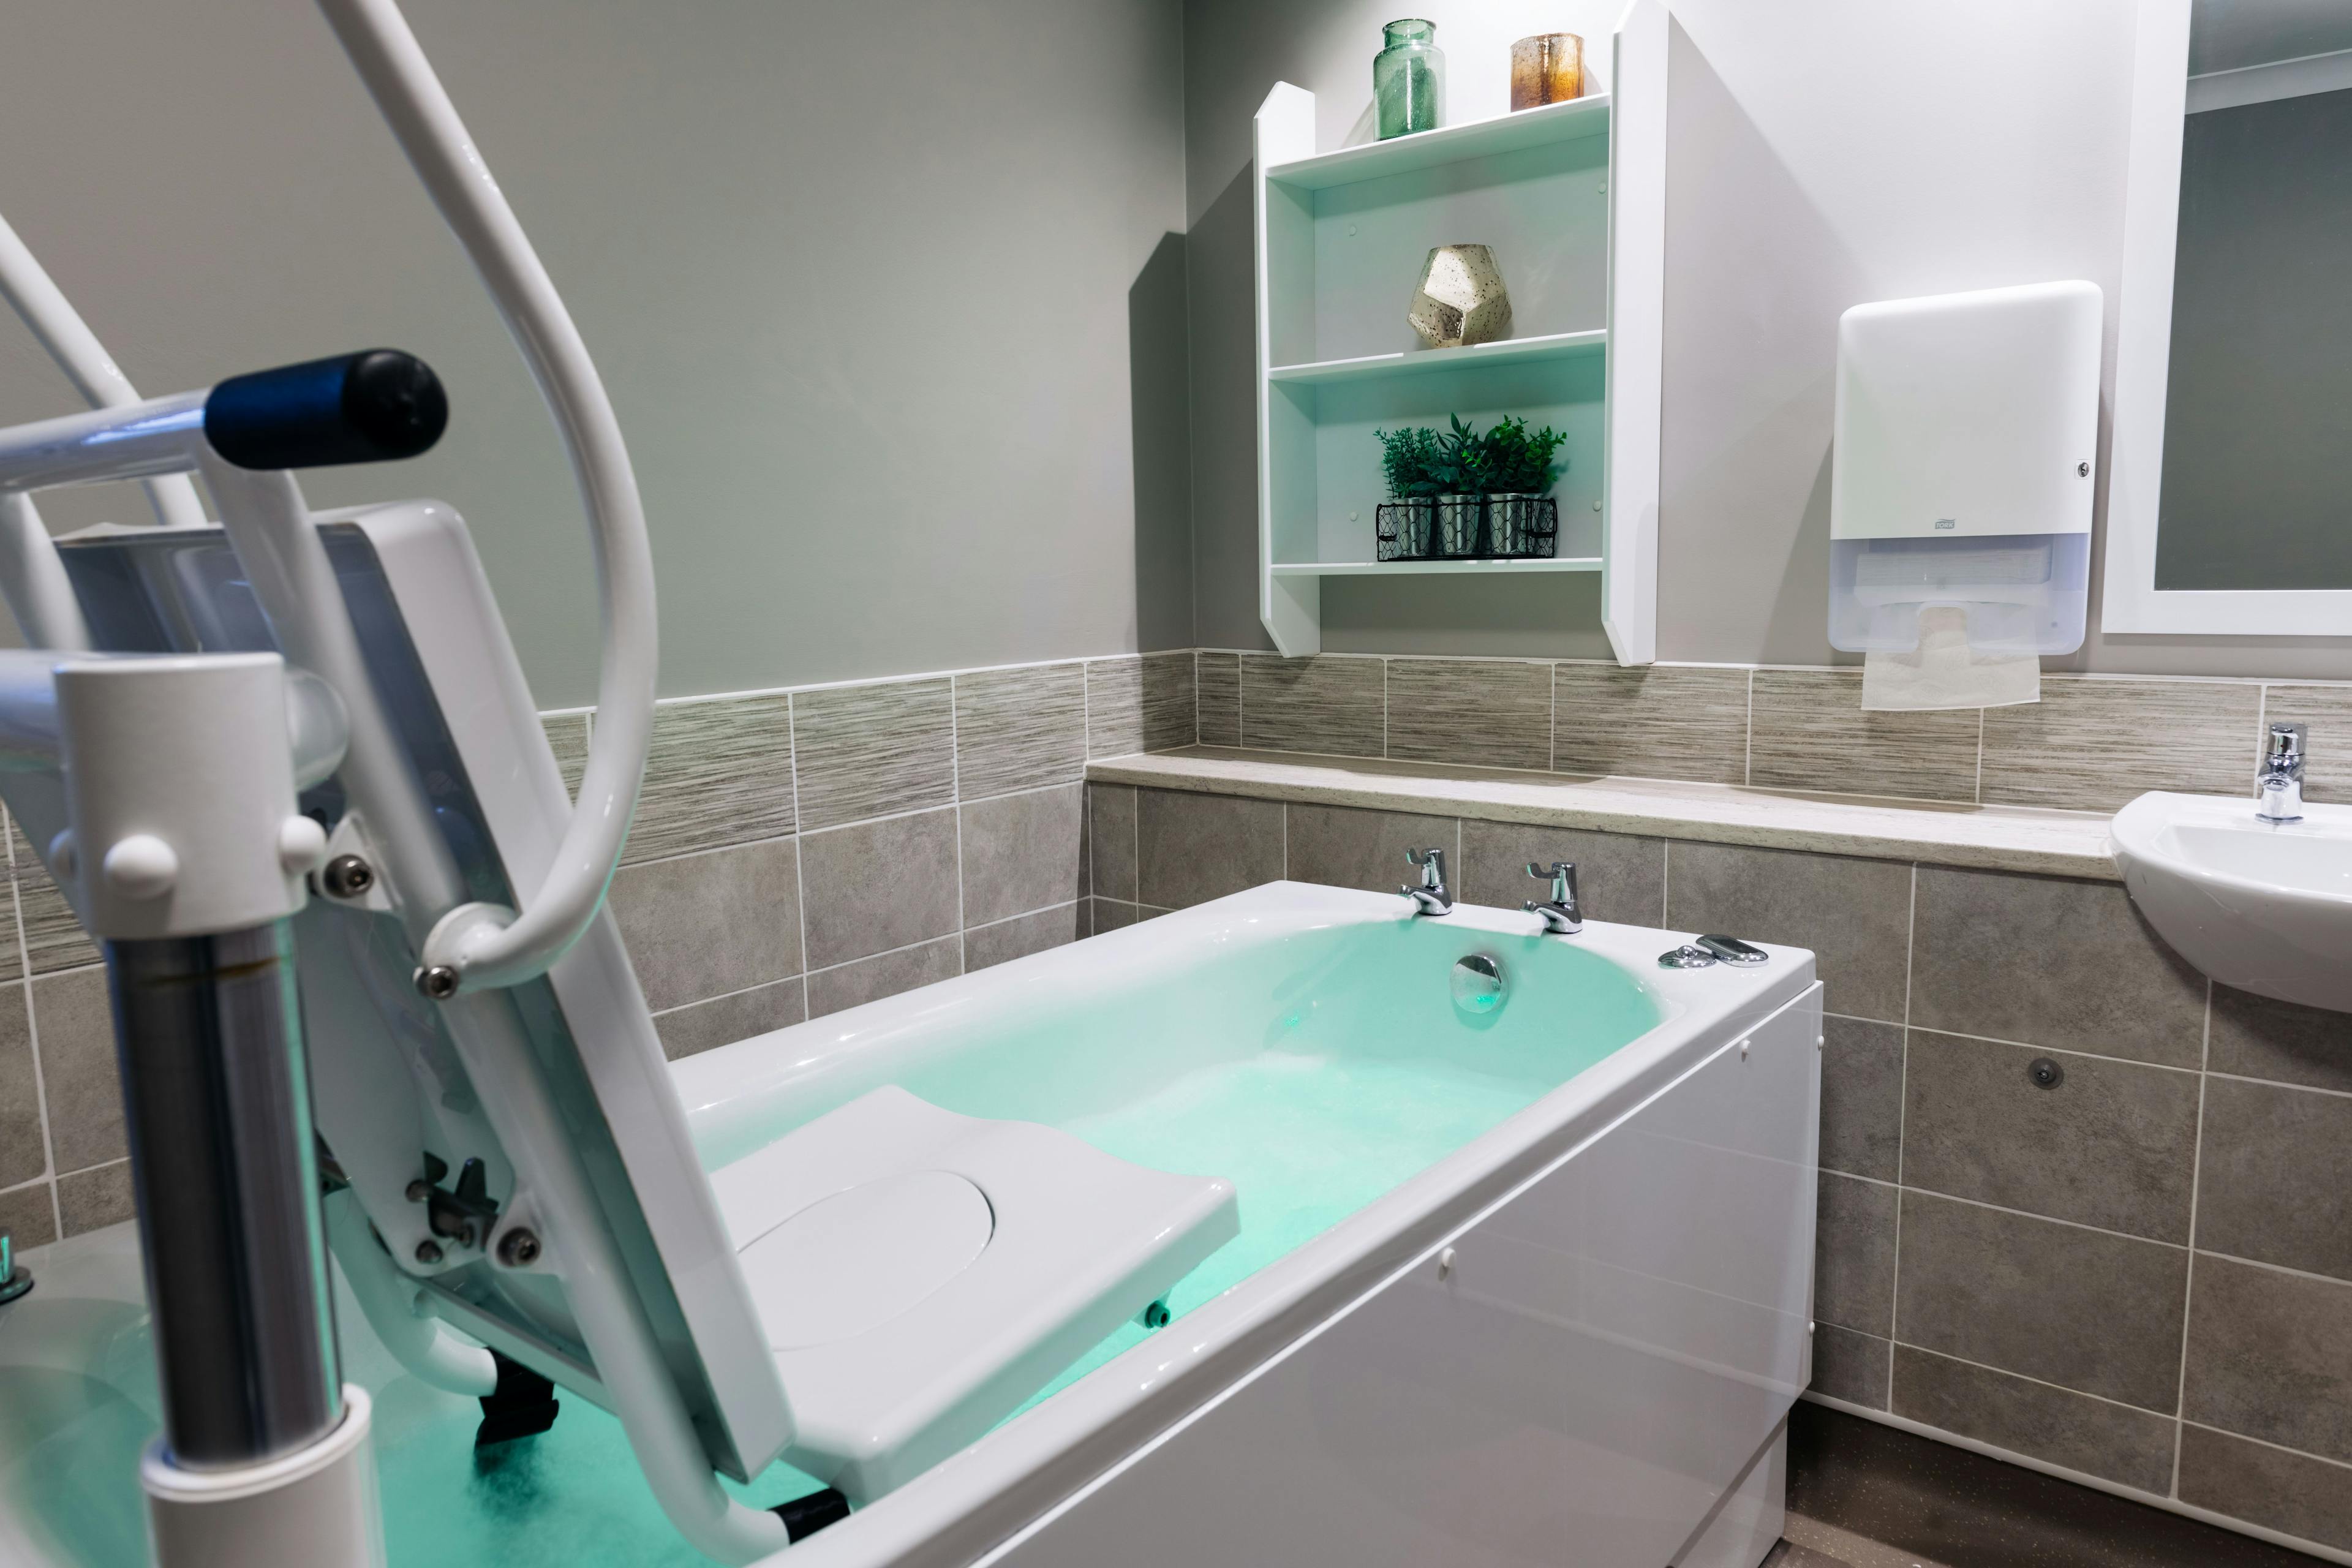 Spa Bathroom at Lochduhar Care Home in Dumfries and Galloway, The Stewartry of Kirkcudbright